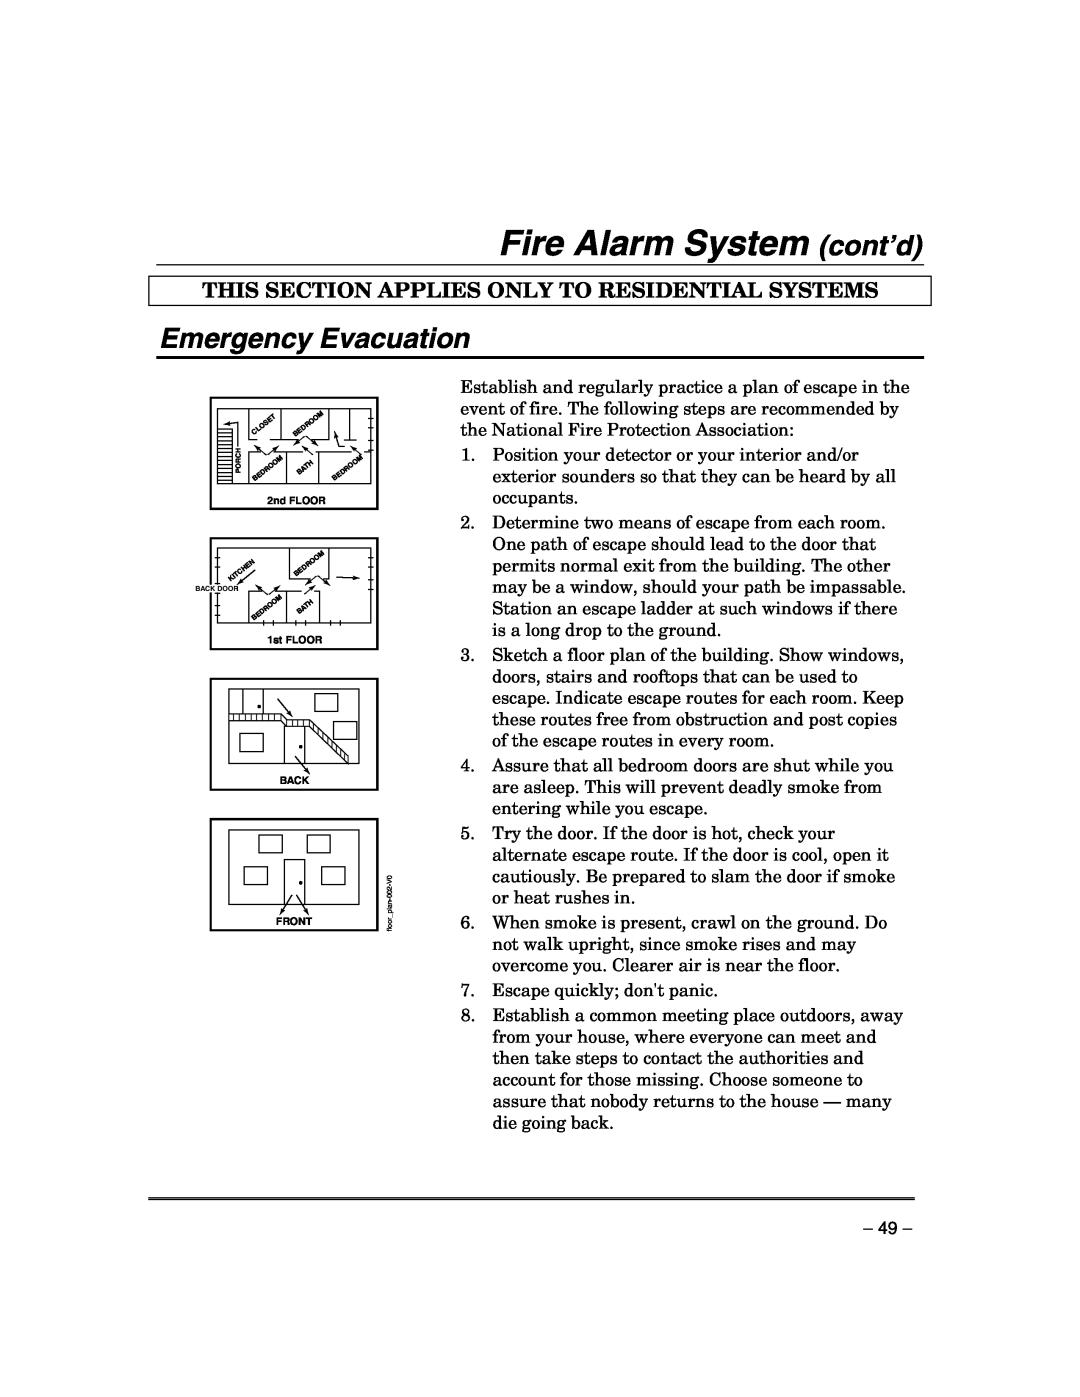 Honeywell VISTA-21IP Emergency Evacuation, Fire Alarm System cont’d, This Section Applies Only To Residential Systems 